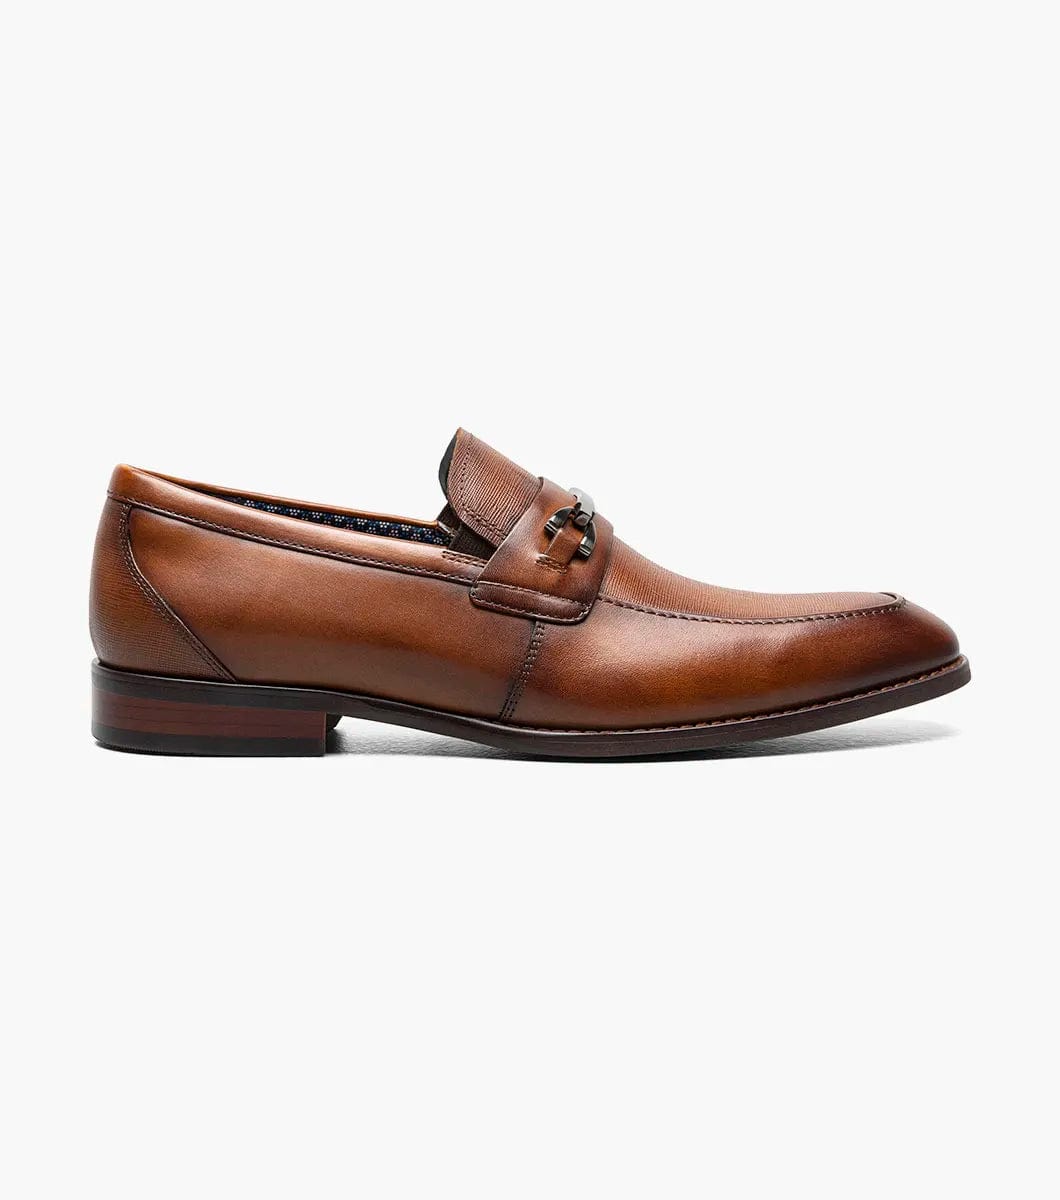 Stacy Adams SHOES Stacy Adams Mens Kaylor Cognac Brown Leather Slip-on Loafer